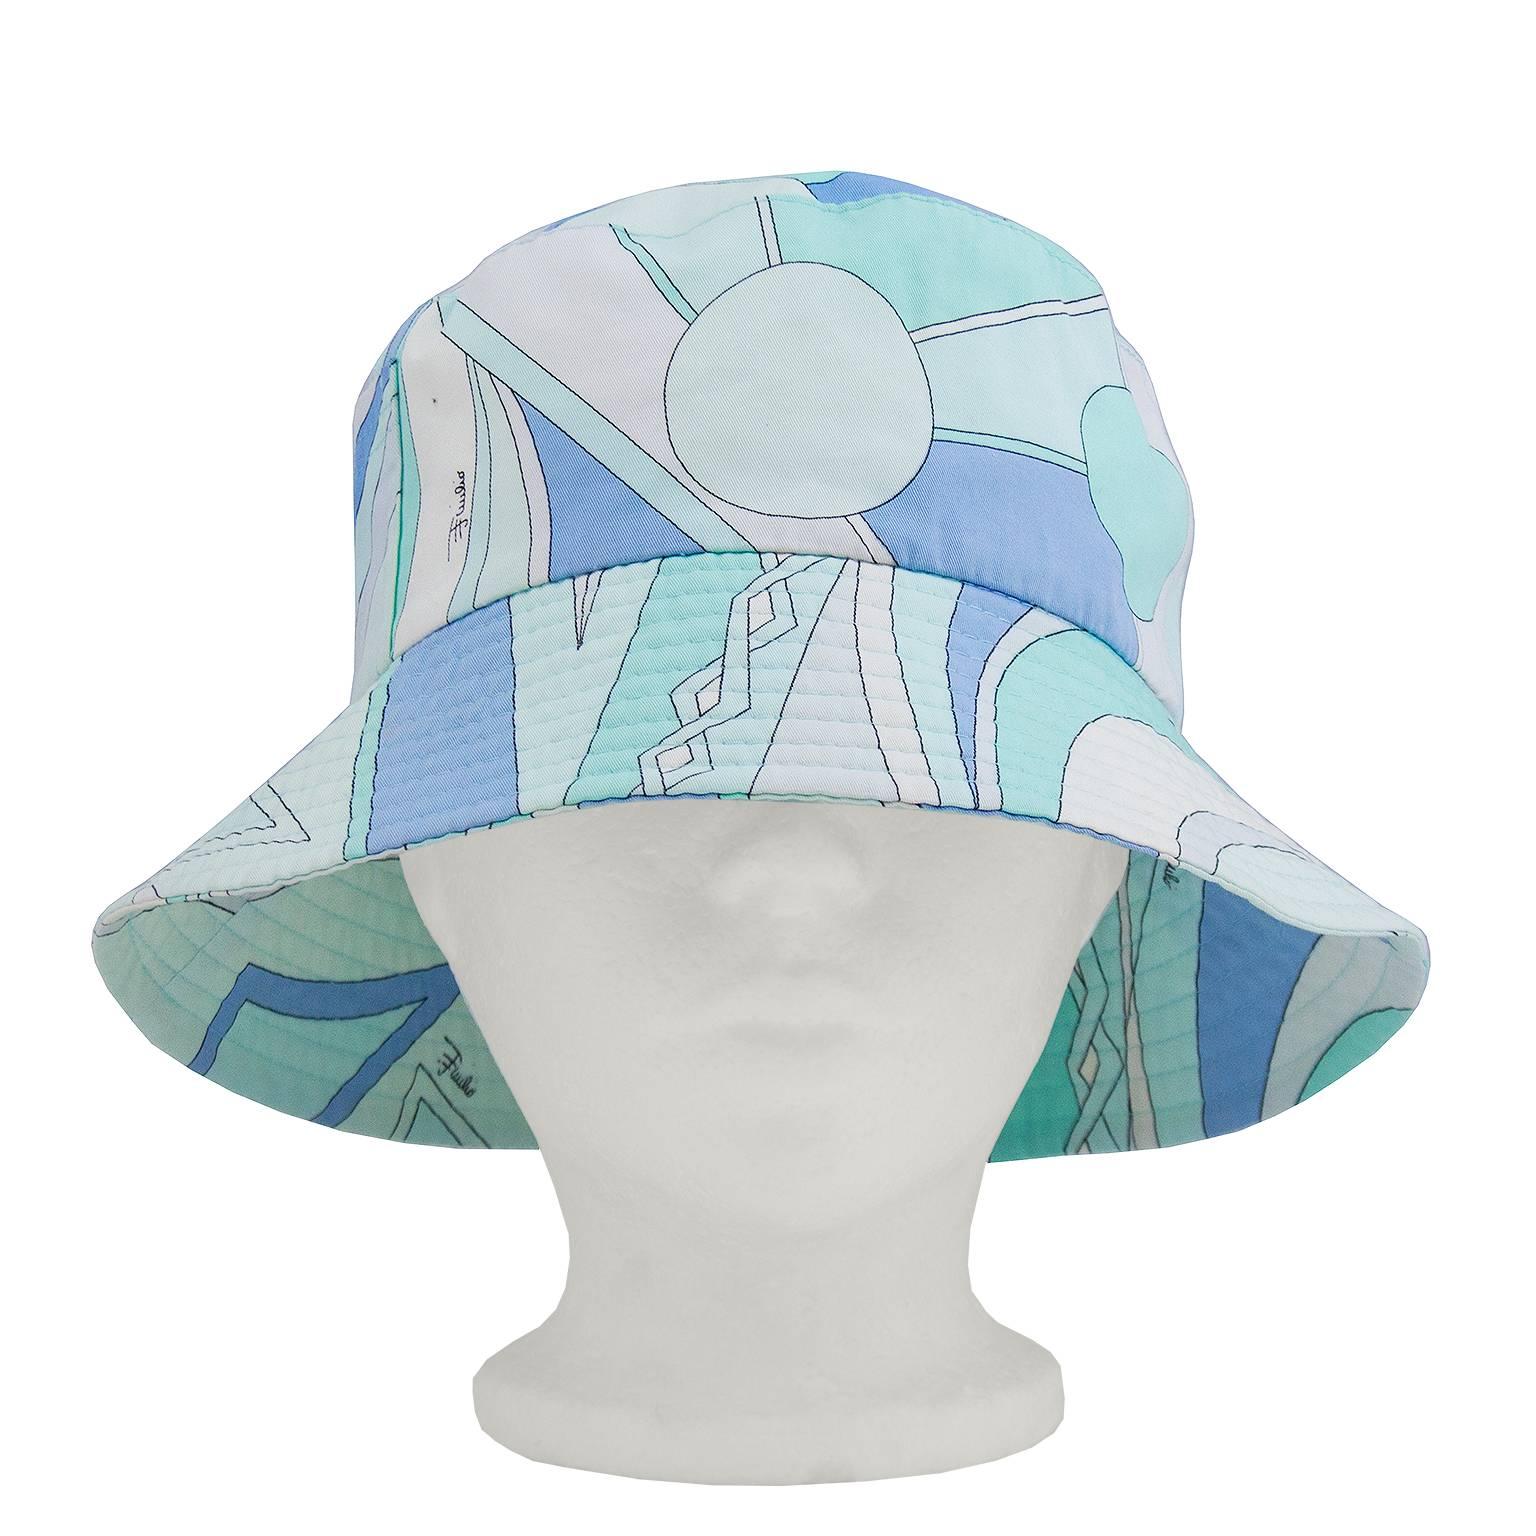 Adorable Pucci multi-color printed cotton bucket hat circa 2000's with signature abstract pattern throughout, and mint green top stitching. Excellent condition. 22” in circumference.